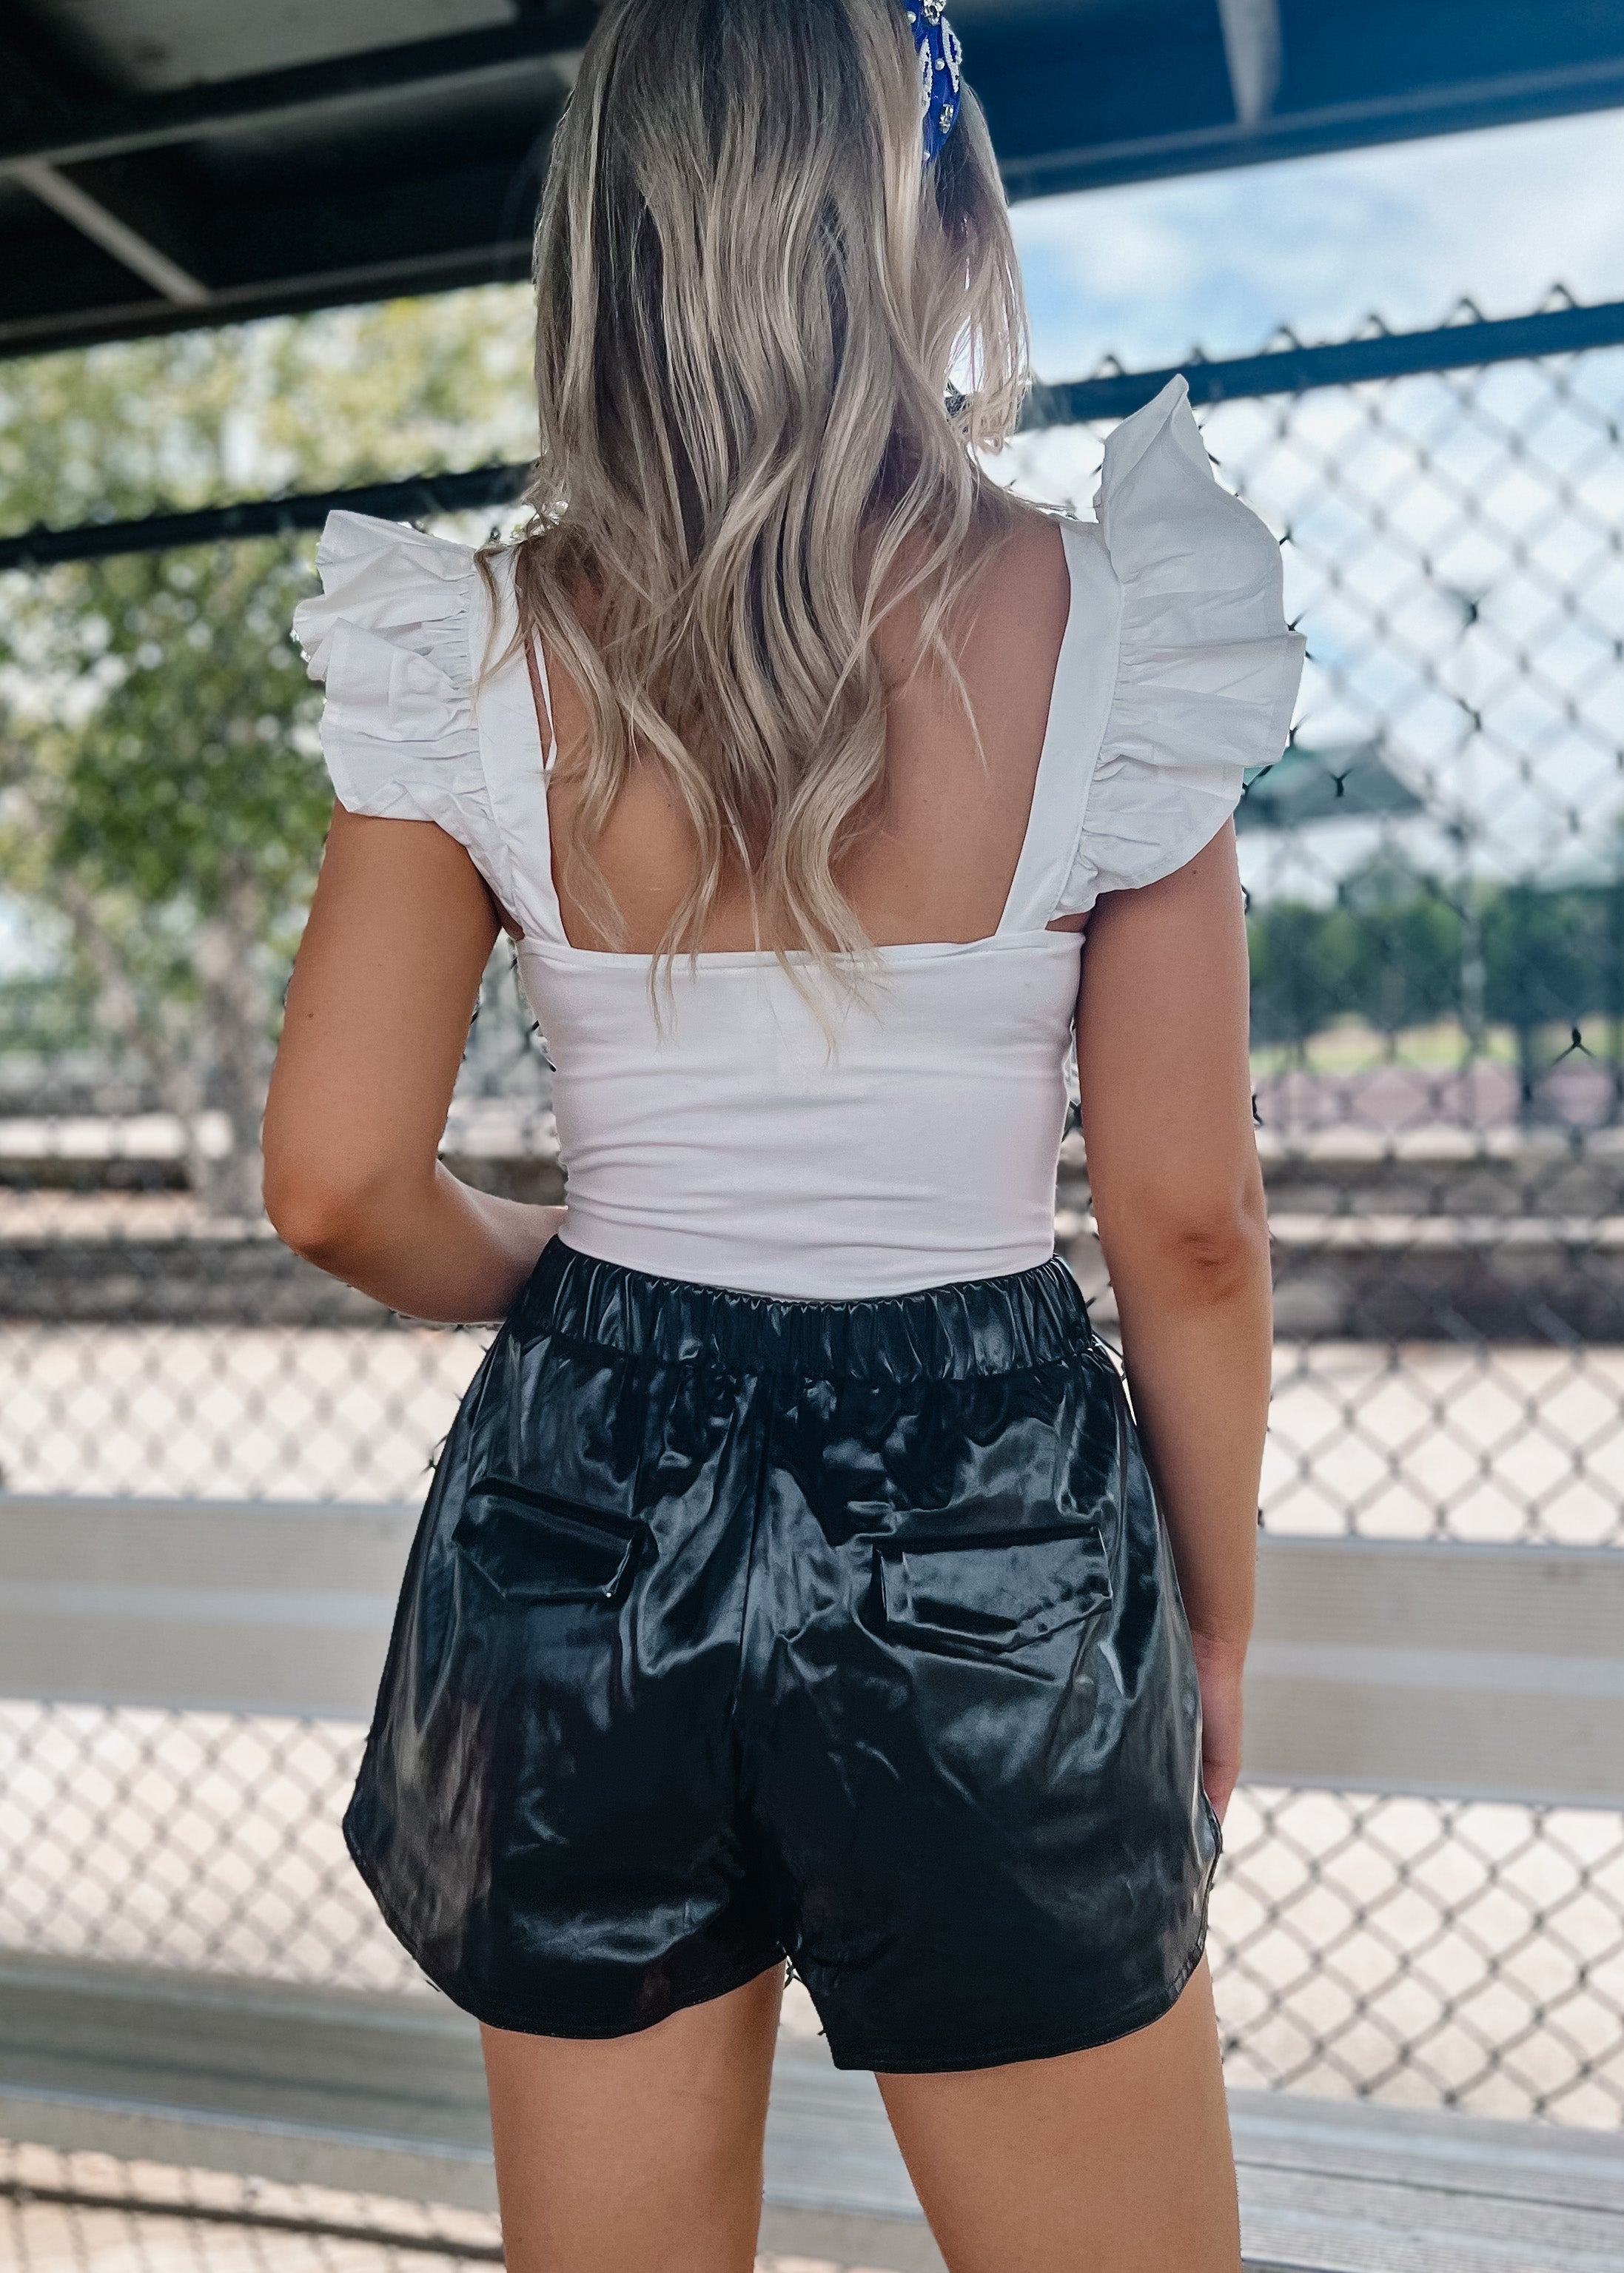 The Mint Julep Boutique Read The Room Vegan Leather Shorts